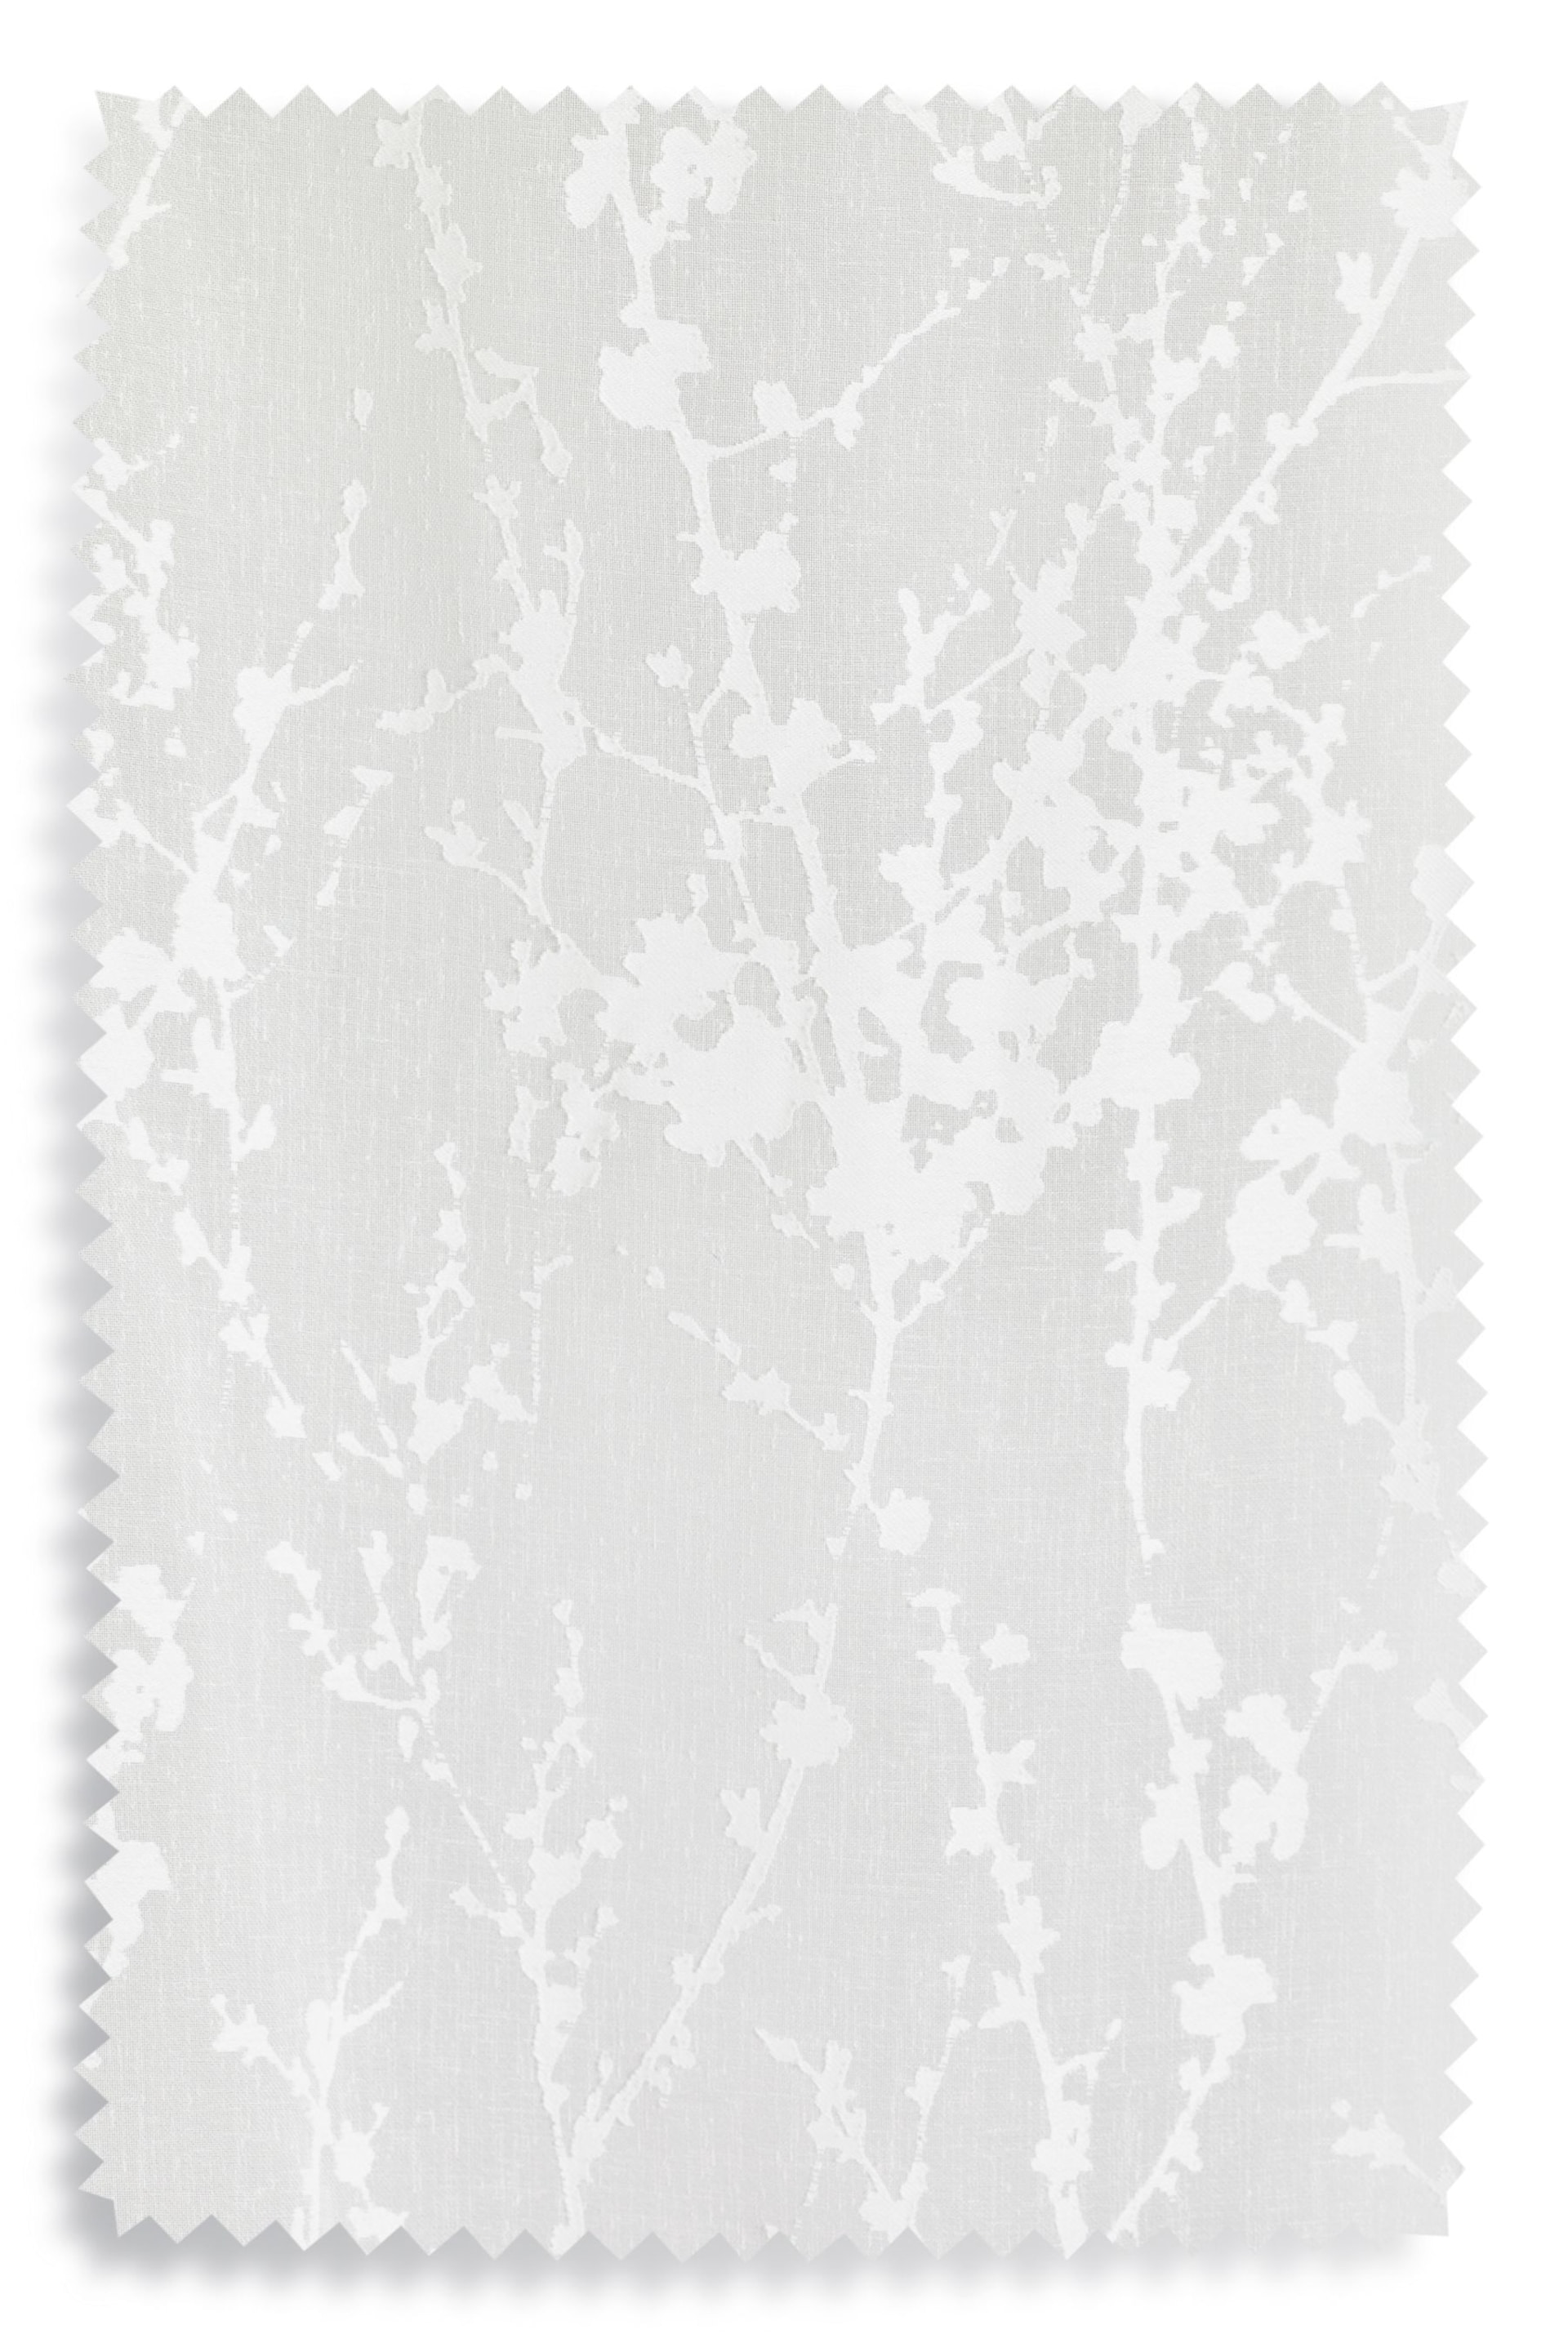 White Blossom Voile Slot Top Unlined Sheer Panel Curtain - Image 3 of 3